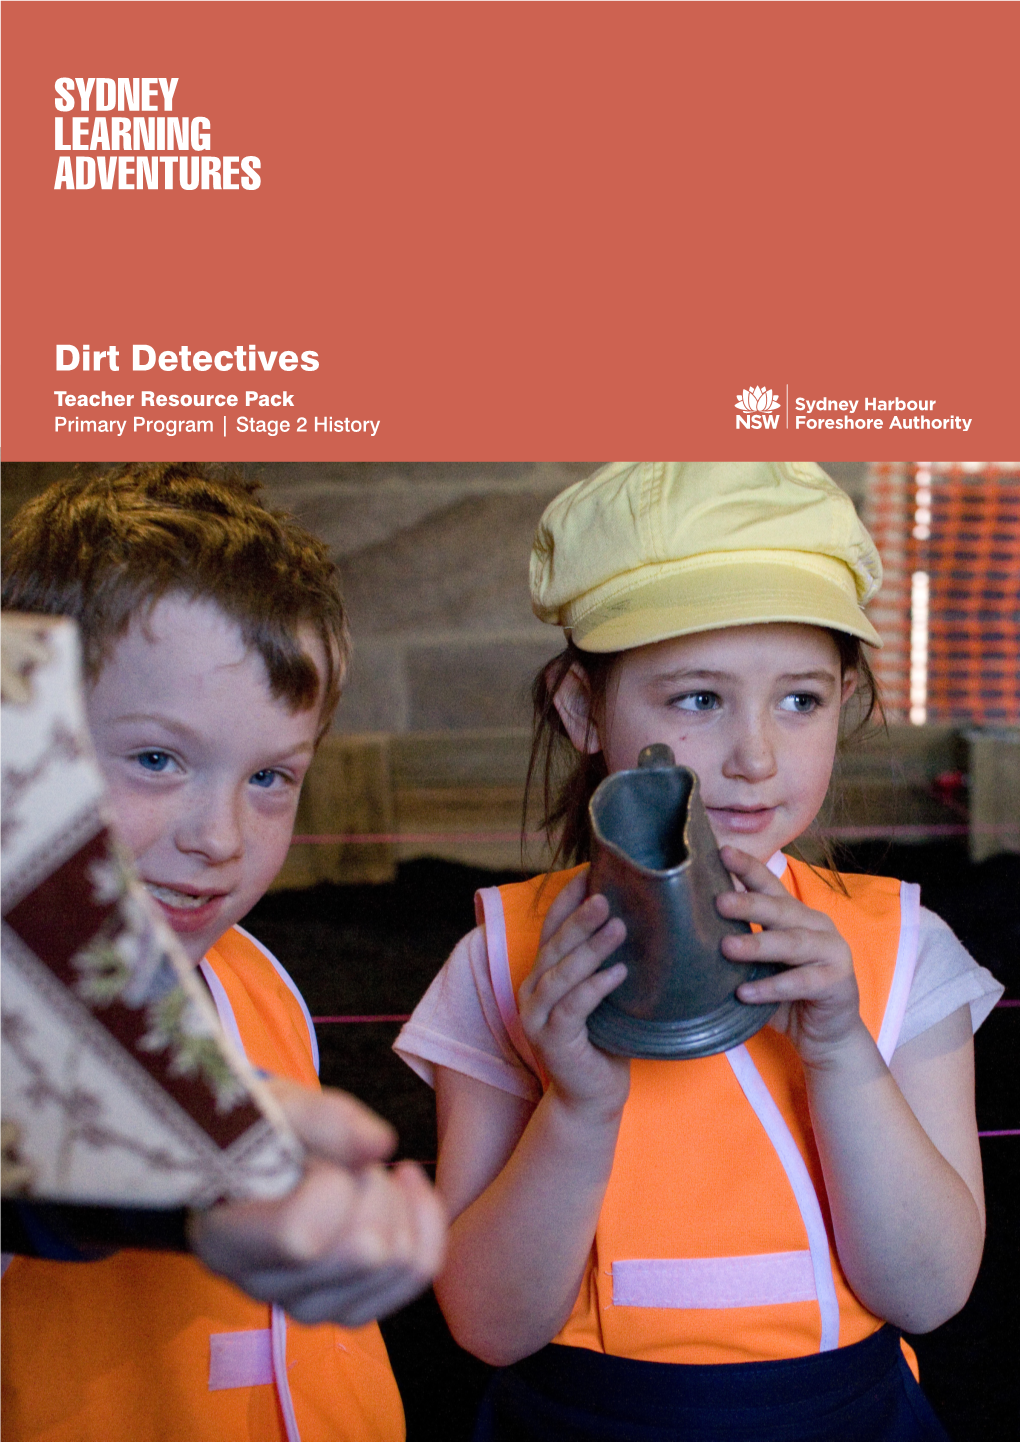 Dirt Detectives Teacher Resource Pack Primary Program | Stage 2 History